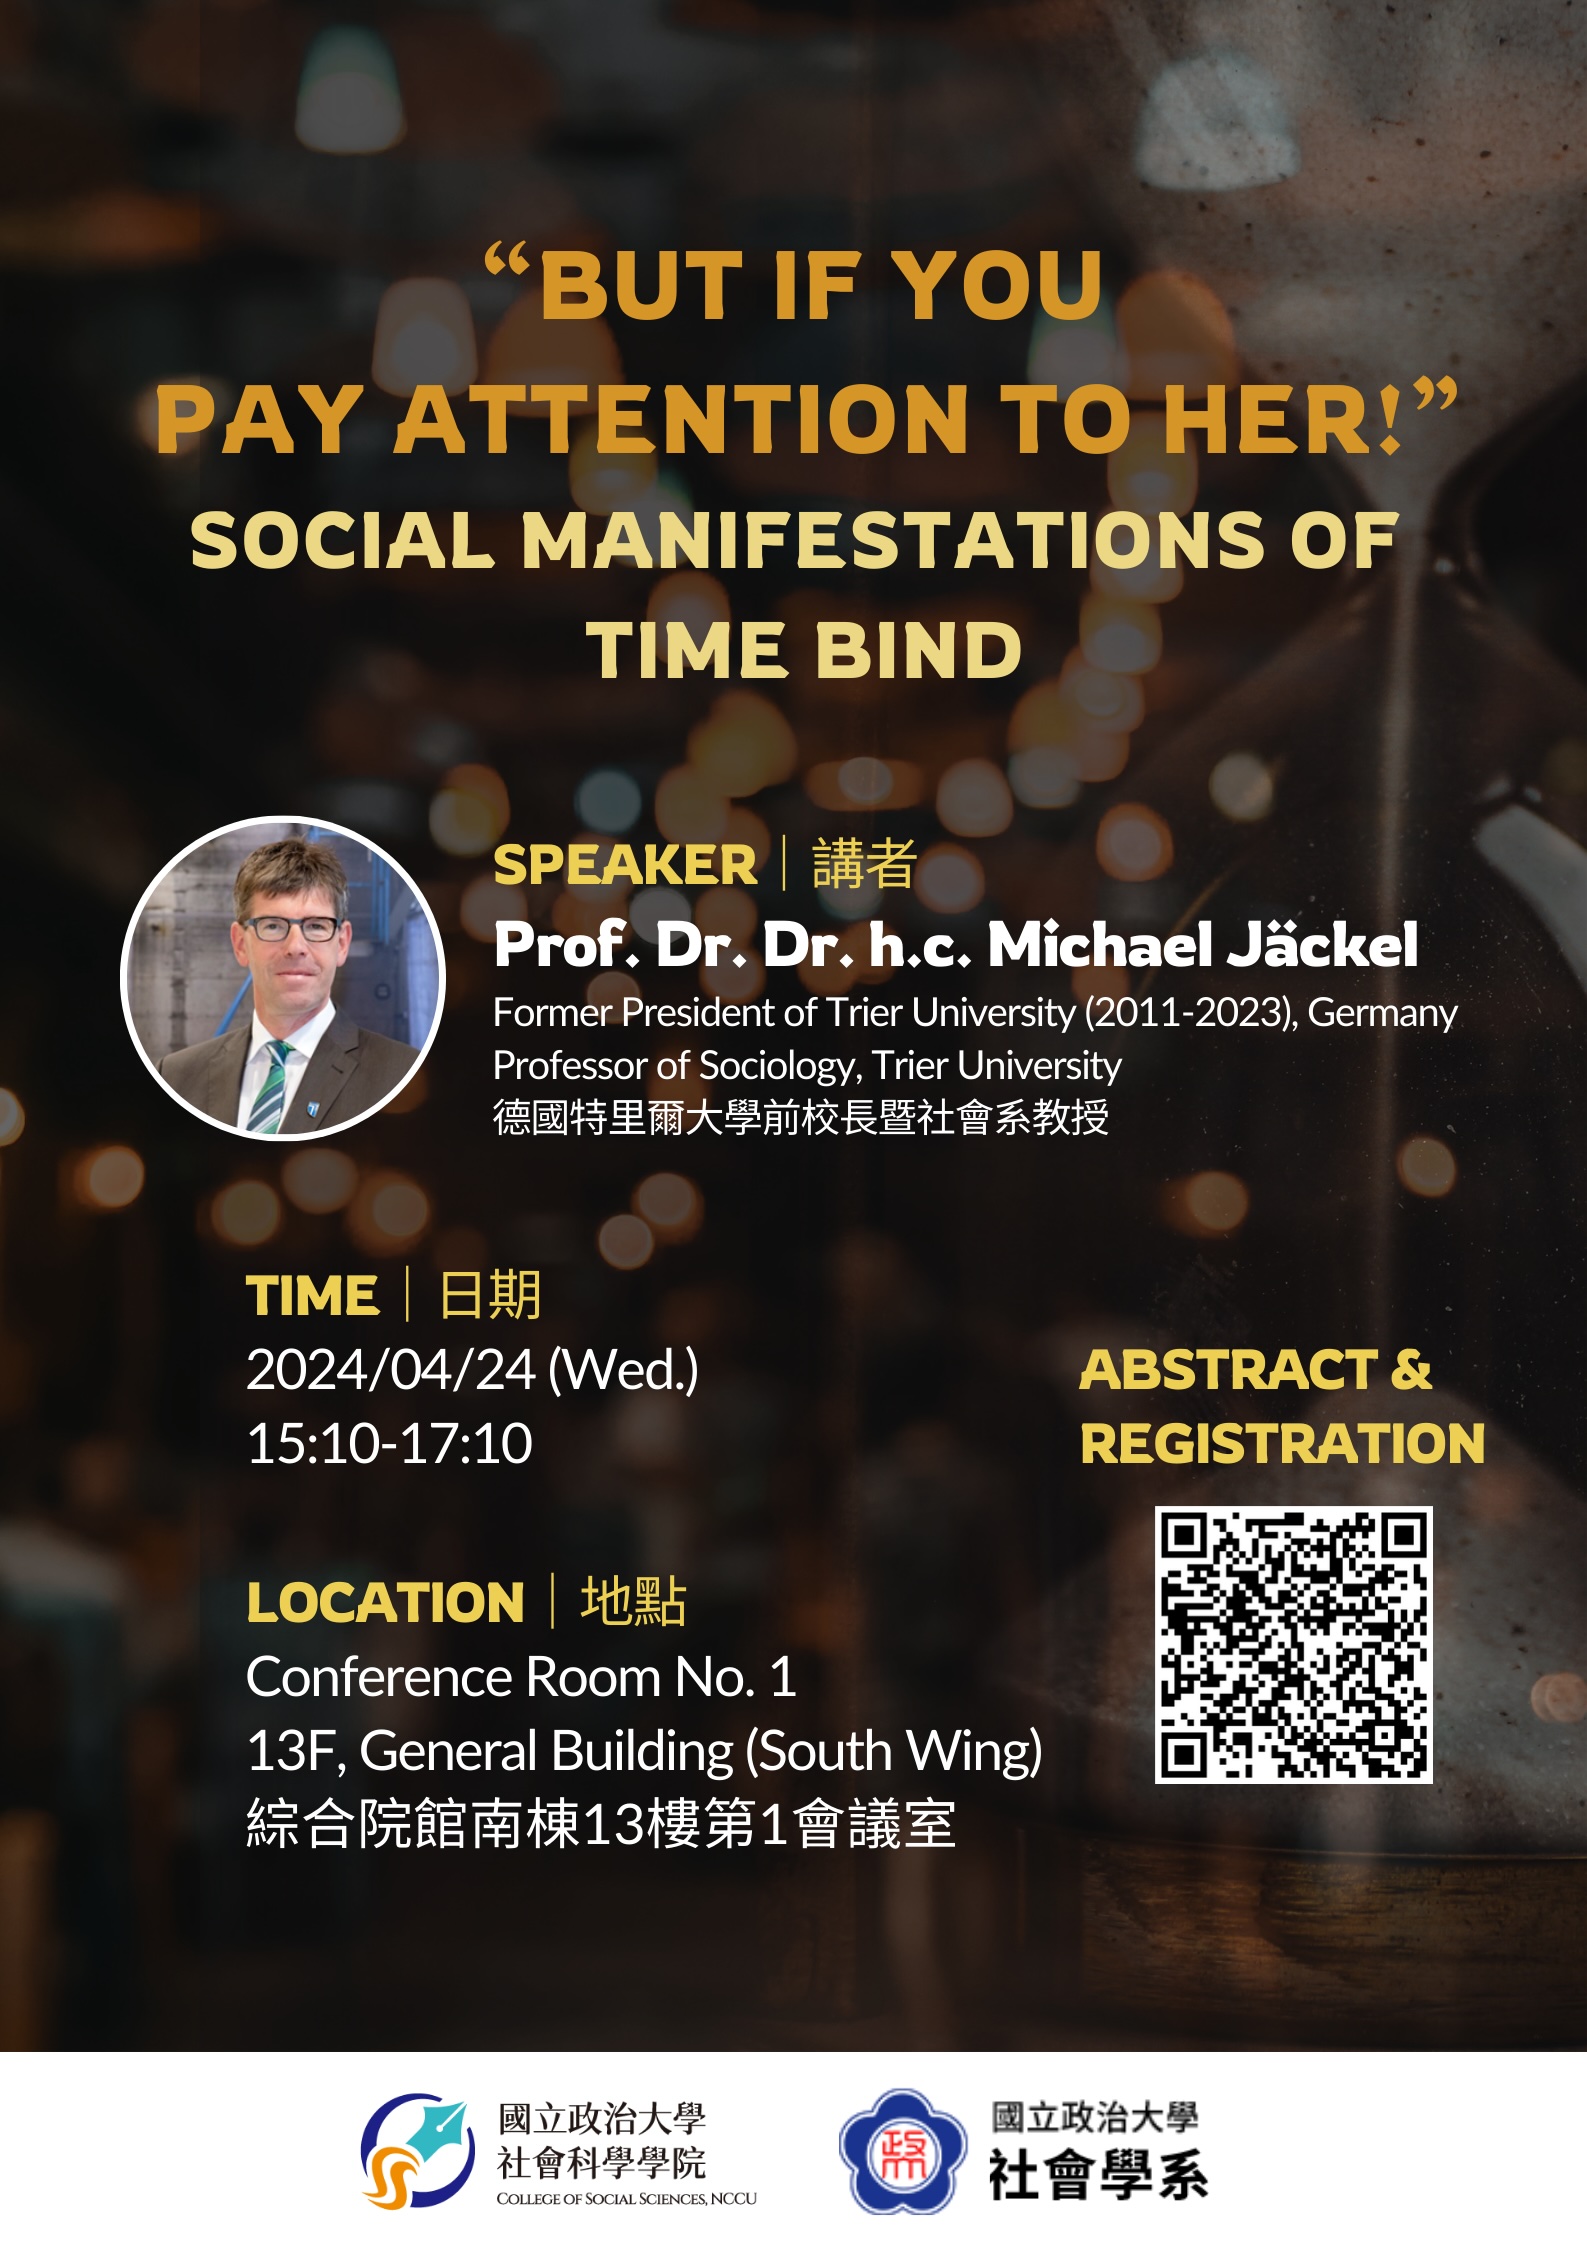 "BUT IF YOU PAY ATTENTION TO HER!" SOCIAL MANIFESTATIONS OF TIME BIND